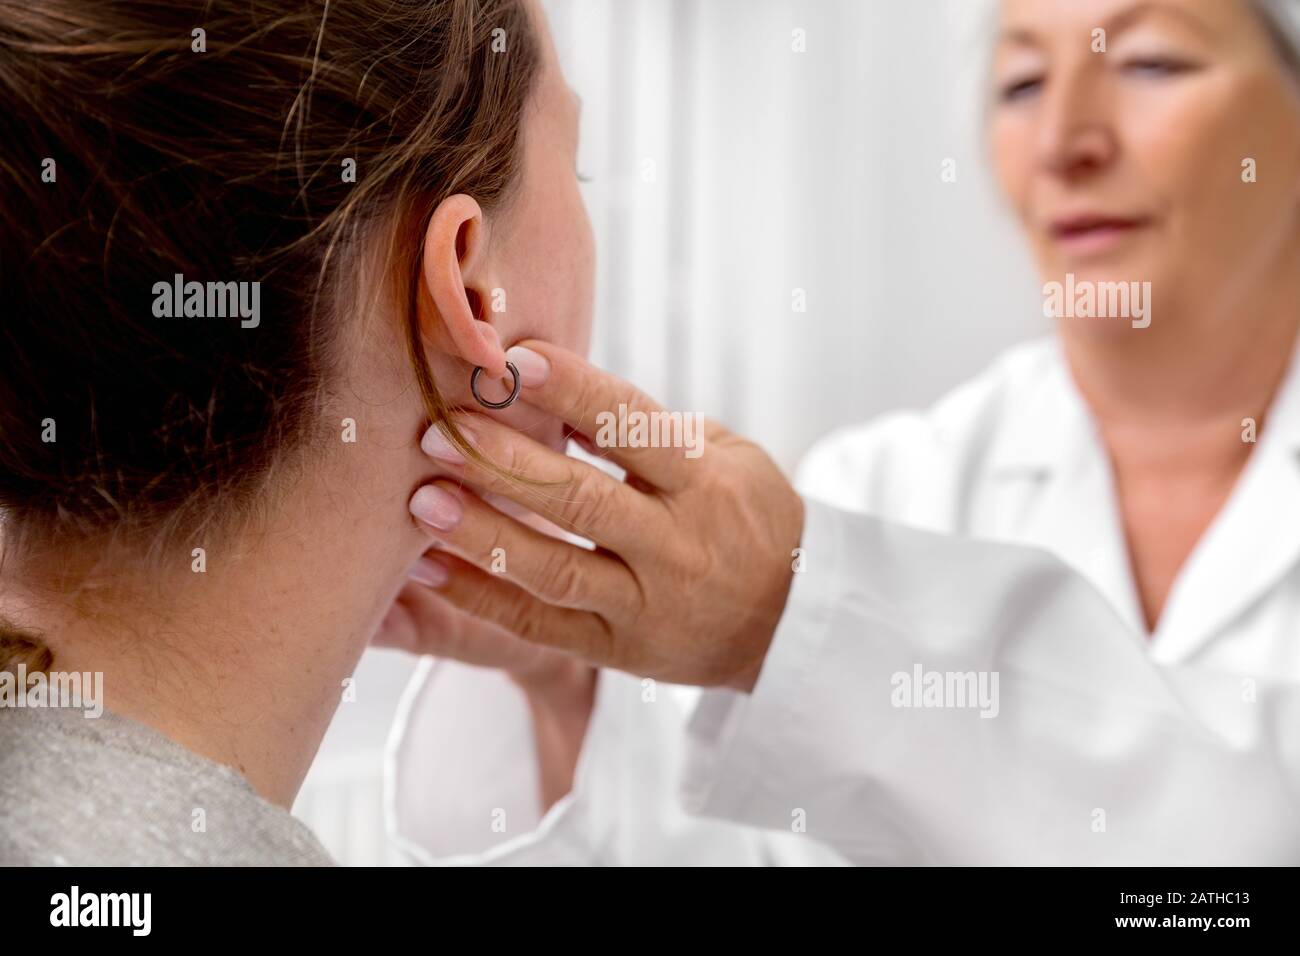 Checkup of patient´s lymph node, doctor sweeping for a flu or cold, medical office Stock Photo